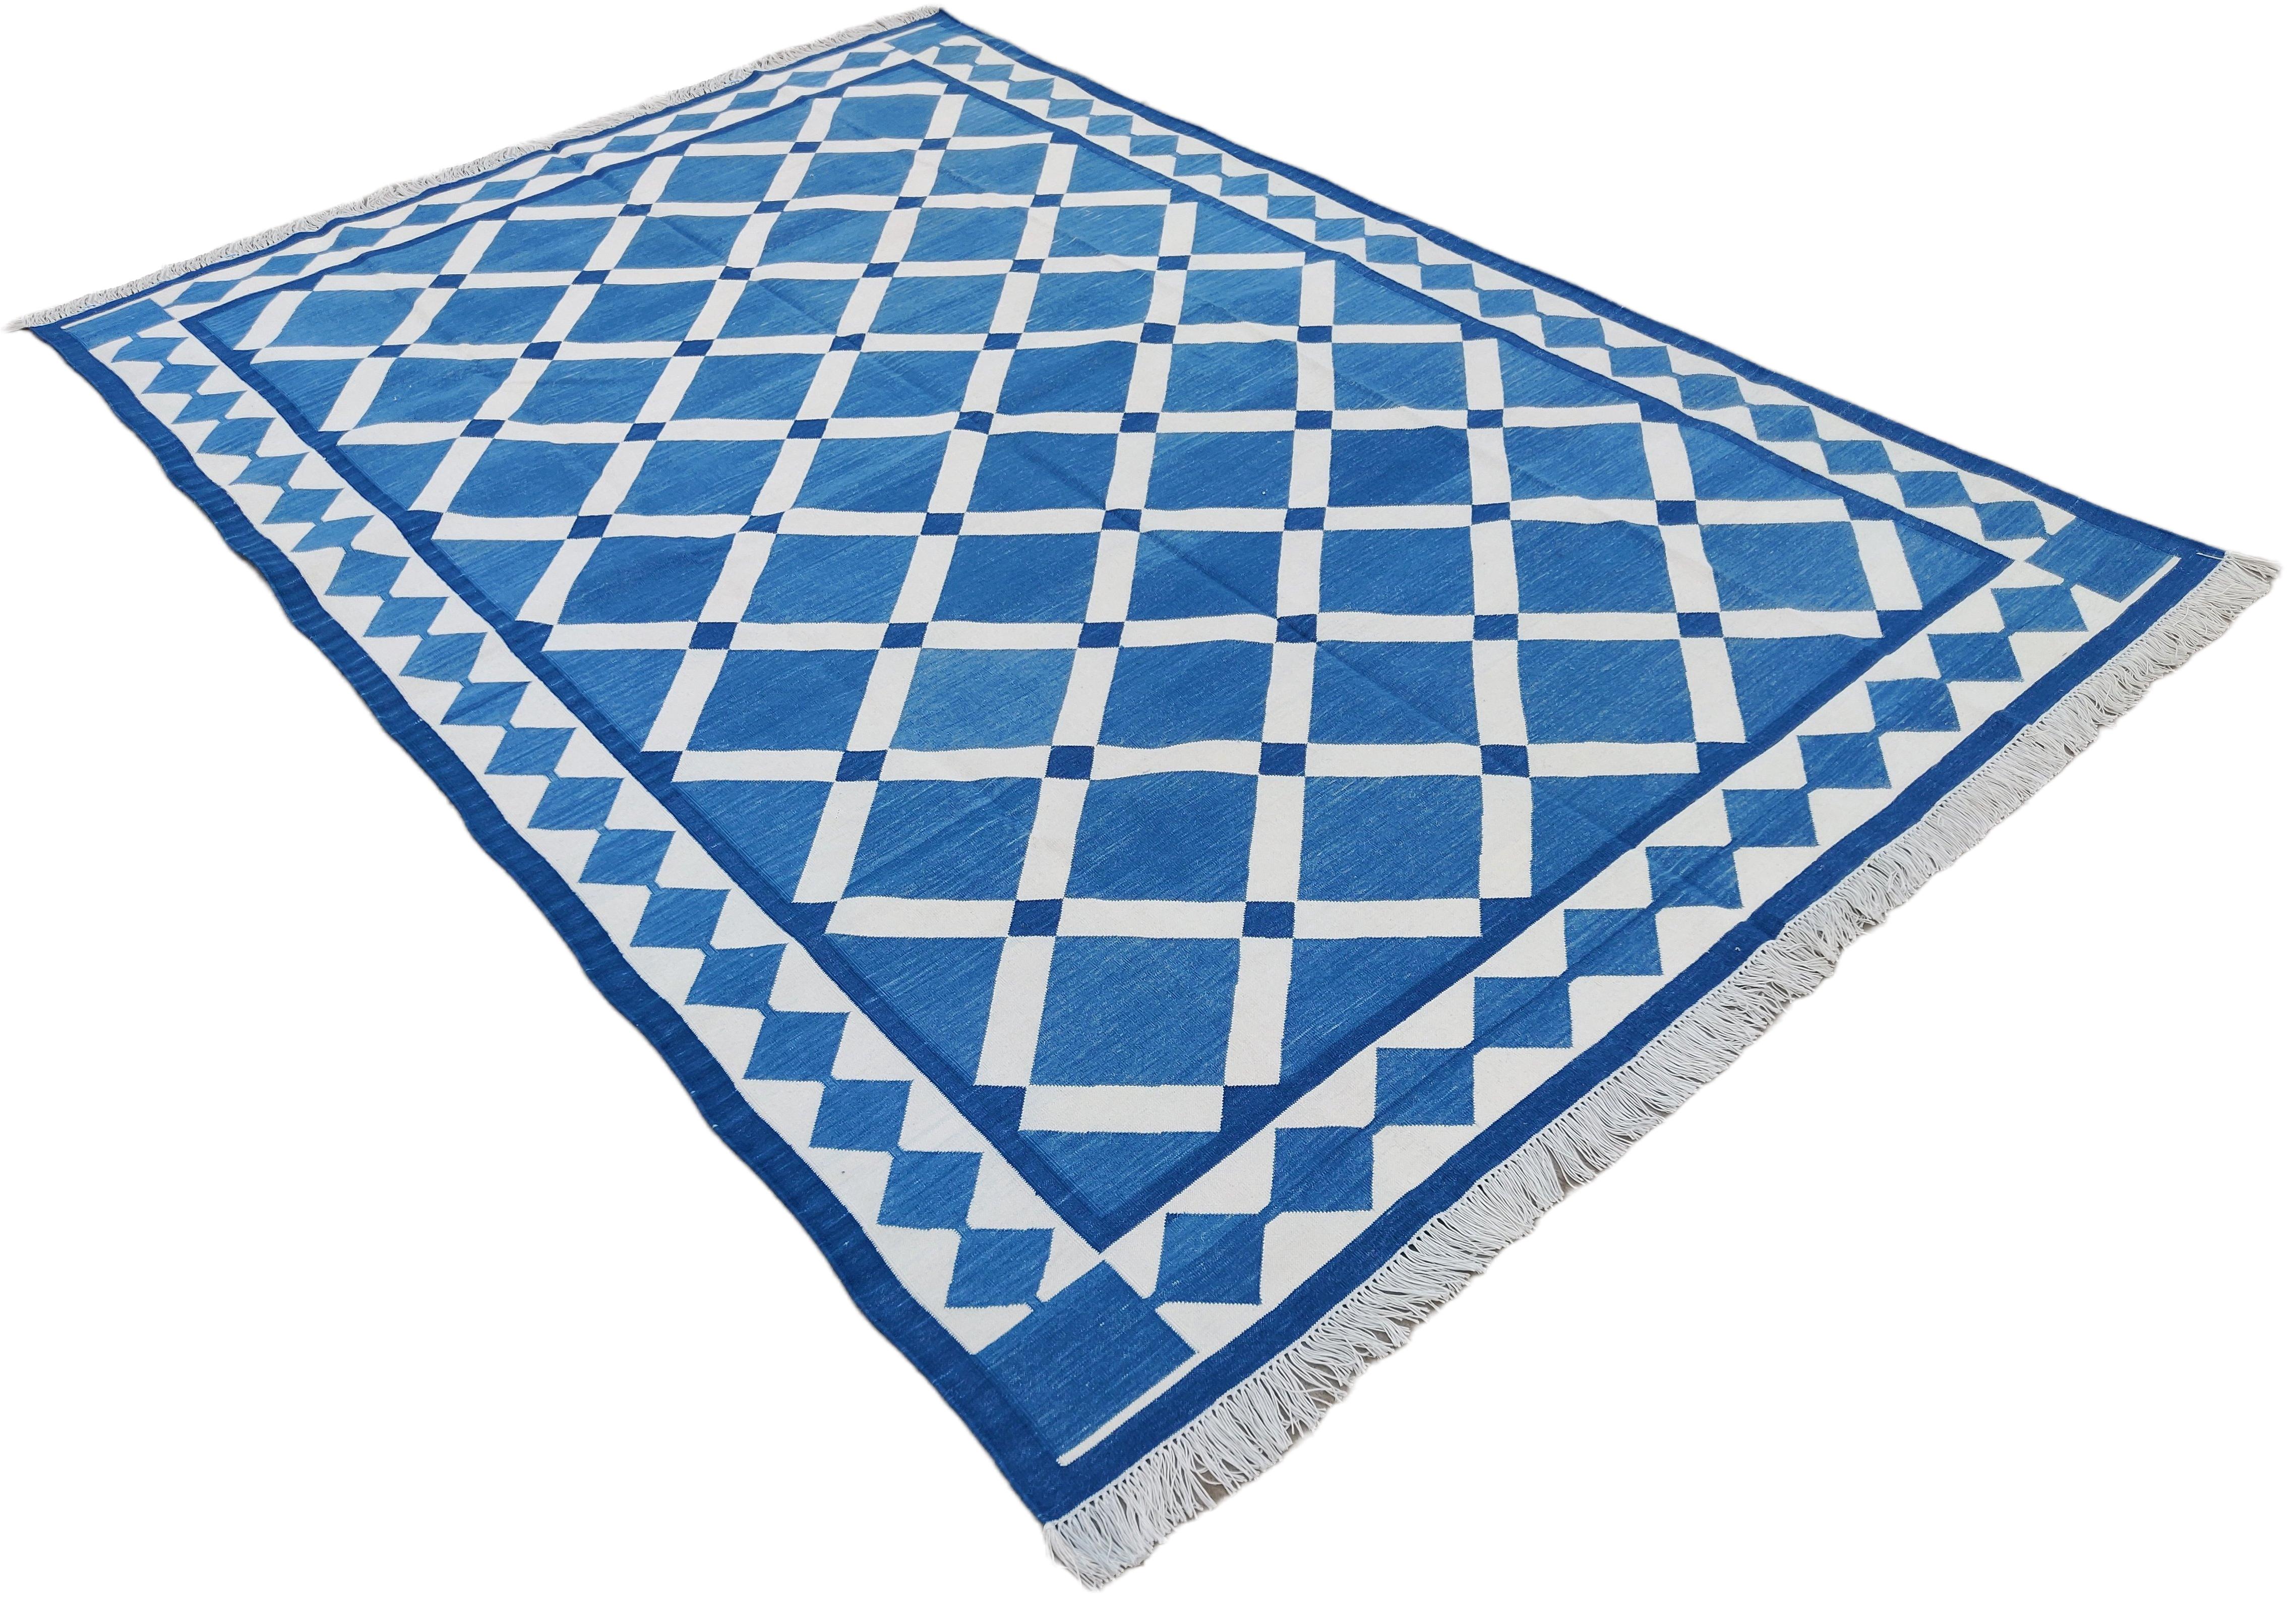 Cotton Vegetable Dyed Reversible Blue And White Geometric Patterned Indian Rug - 8'x10'
These special flat-weave dhurries are hand-woven with 15 ply 100% cotton yarn. Due to the special manufacturing techniques used to create our rugs, the size and